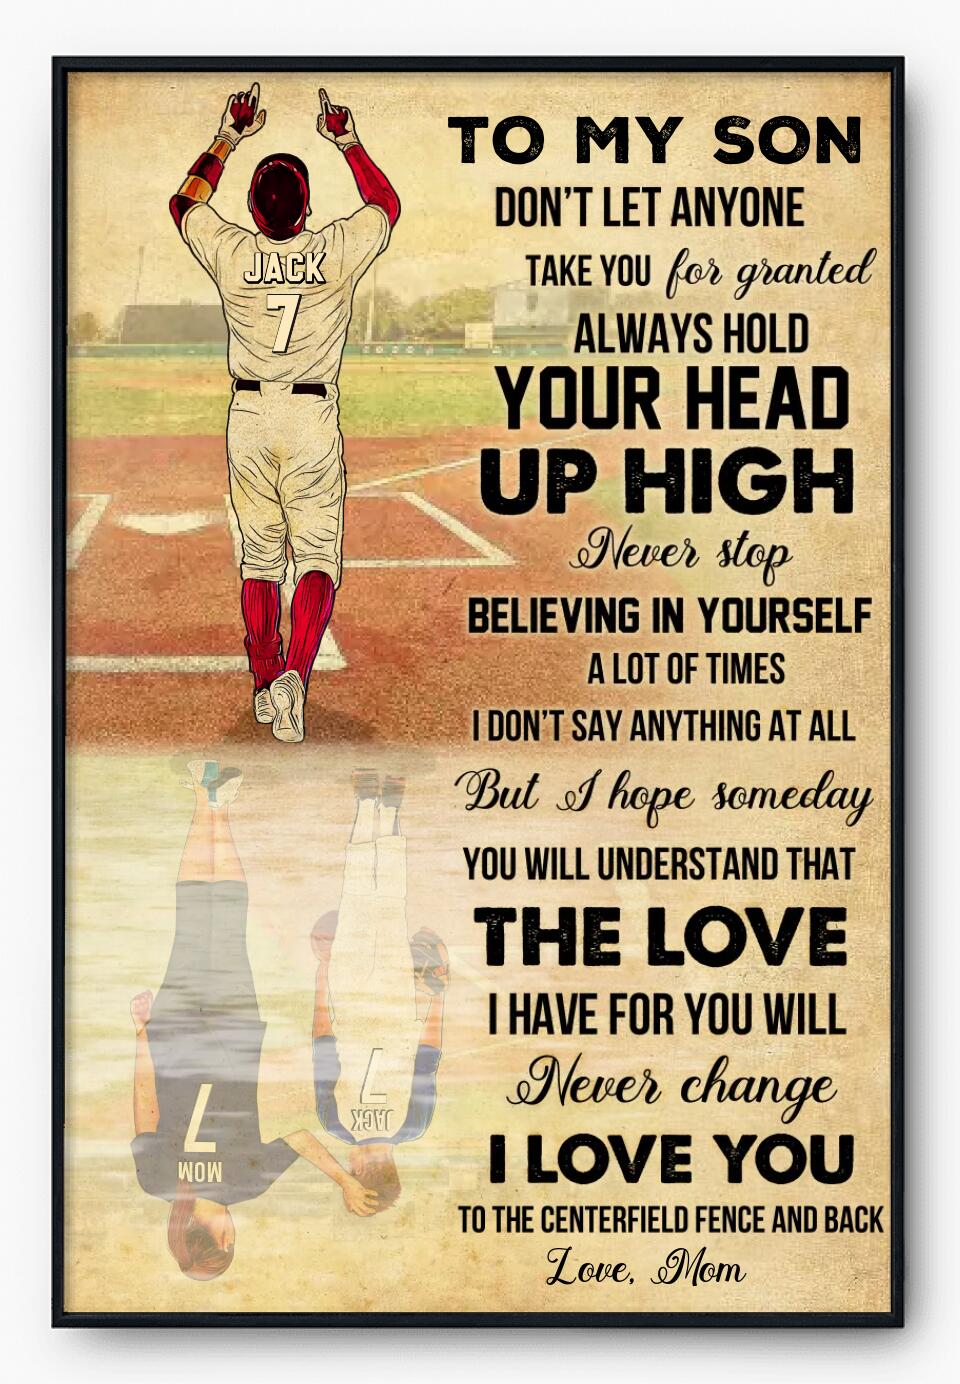 Custom Personalized Baseball Poster, Canvas, Baseball Gifts, Baseball Poster, Baseball Room Decor, Gifts For Son With Custom